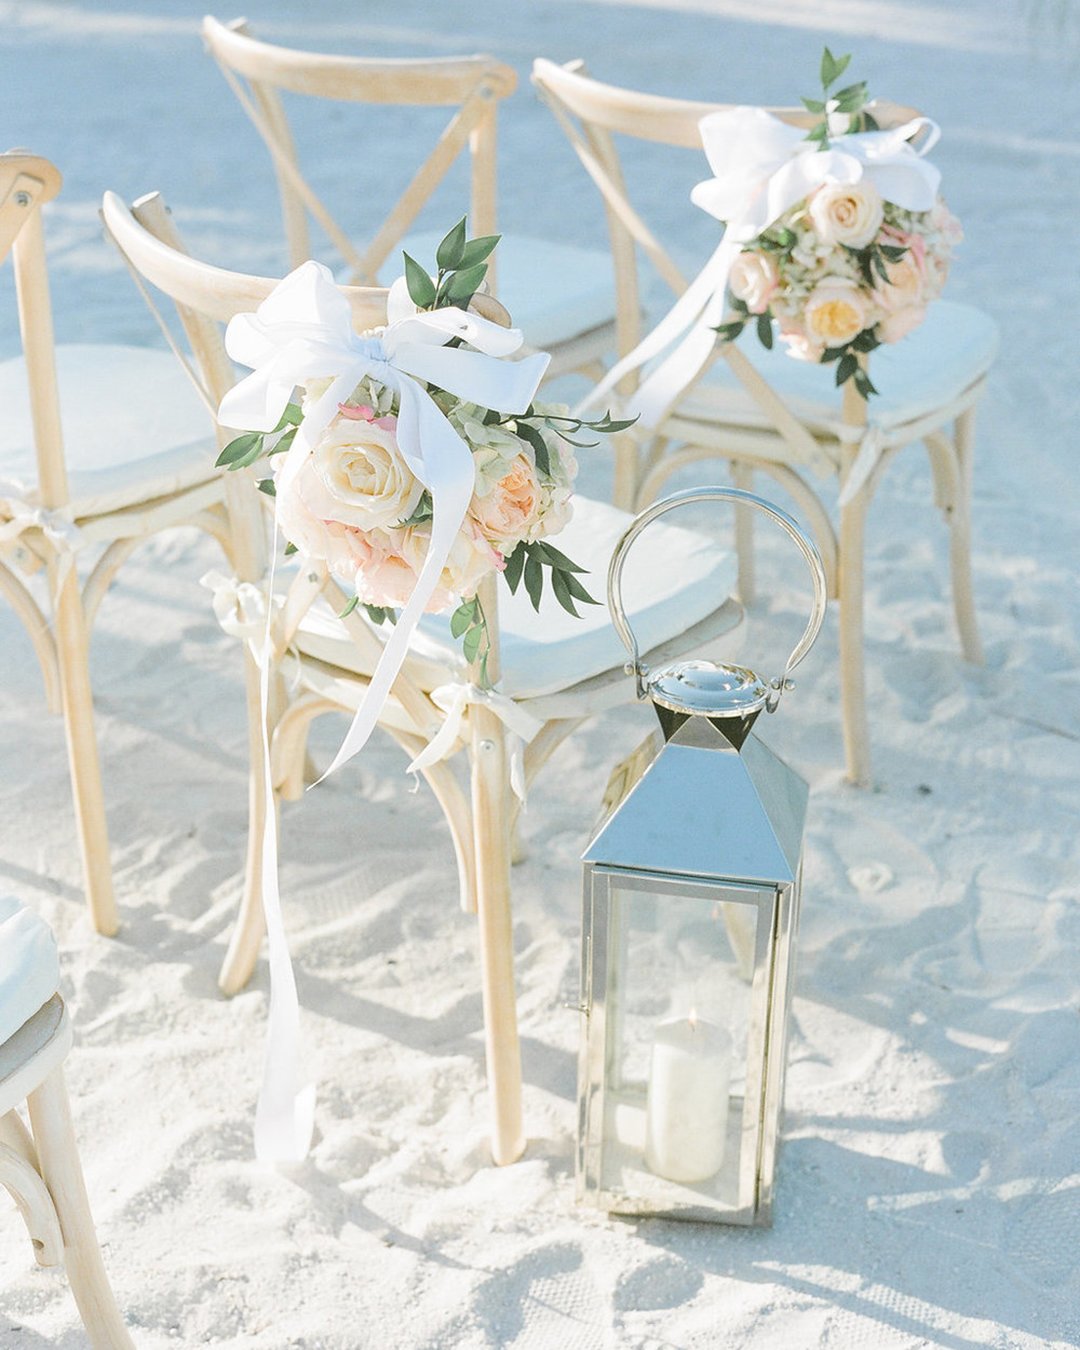 beach wedding decoration ideas flowers and ribbons decorate chair natalie watson photography